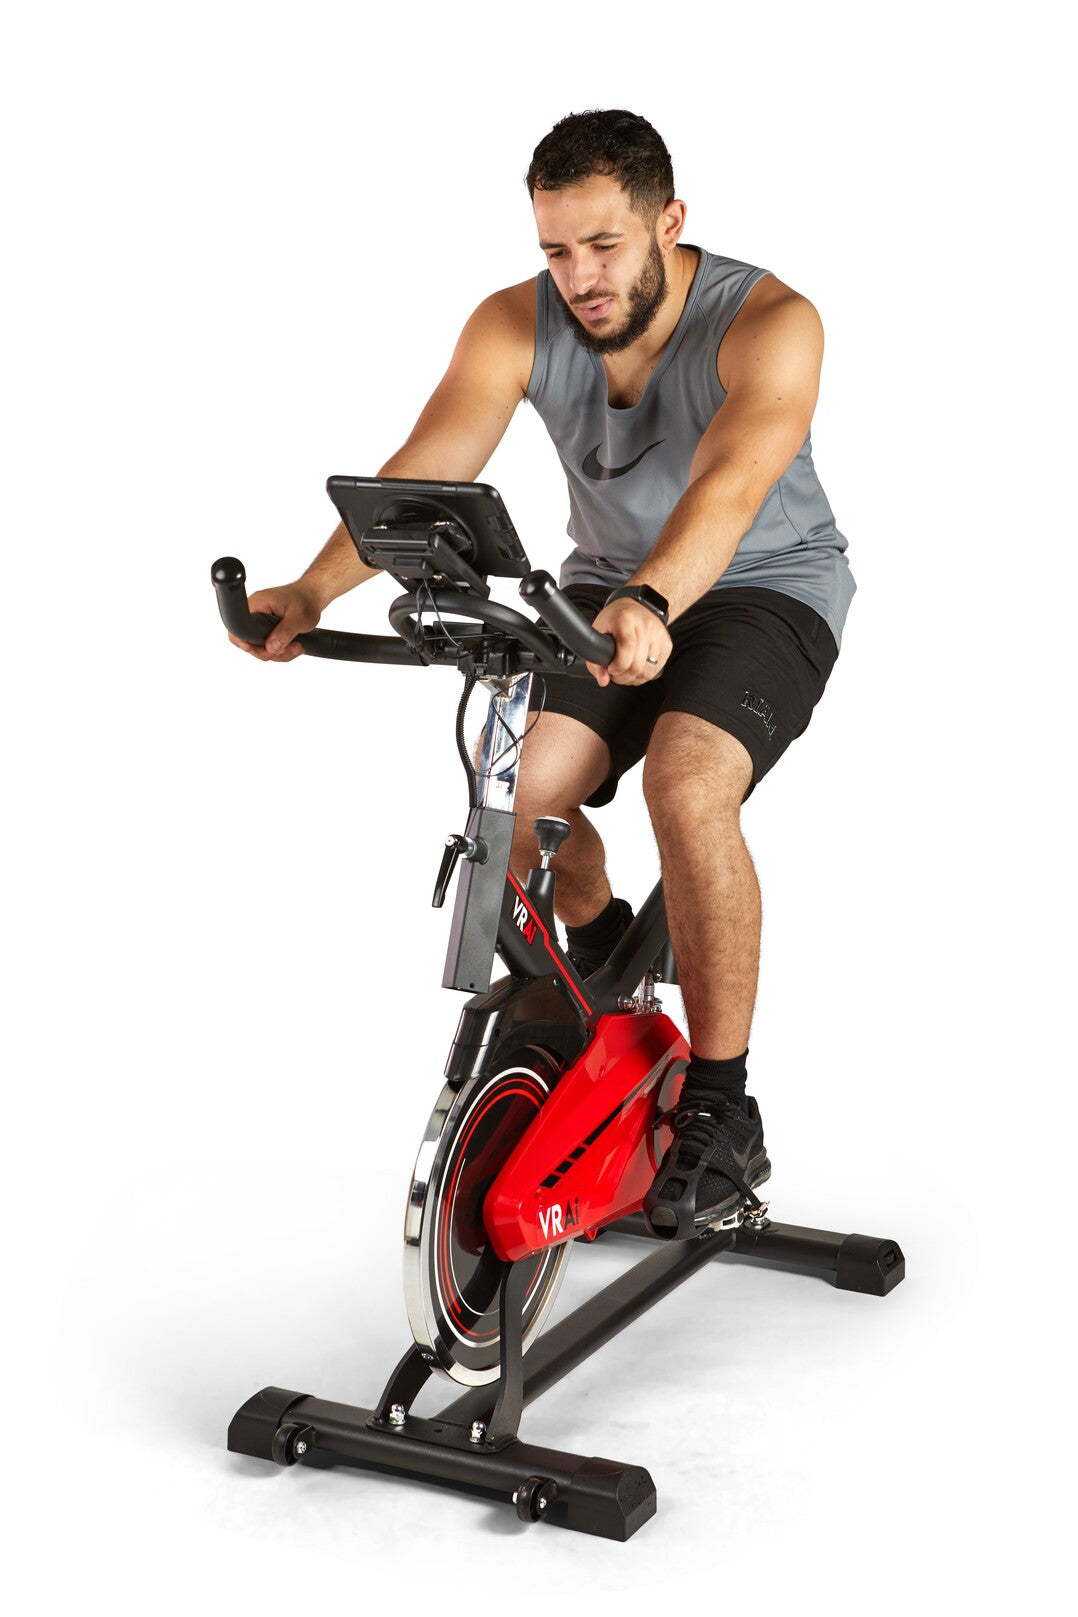 VRAi FITNESS SB1000X EXERCISE SPIN BIKE WITH BLUETOOTH APP COMPATIBILITY [Ultimate Fitness Bundle]